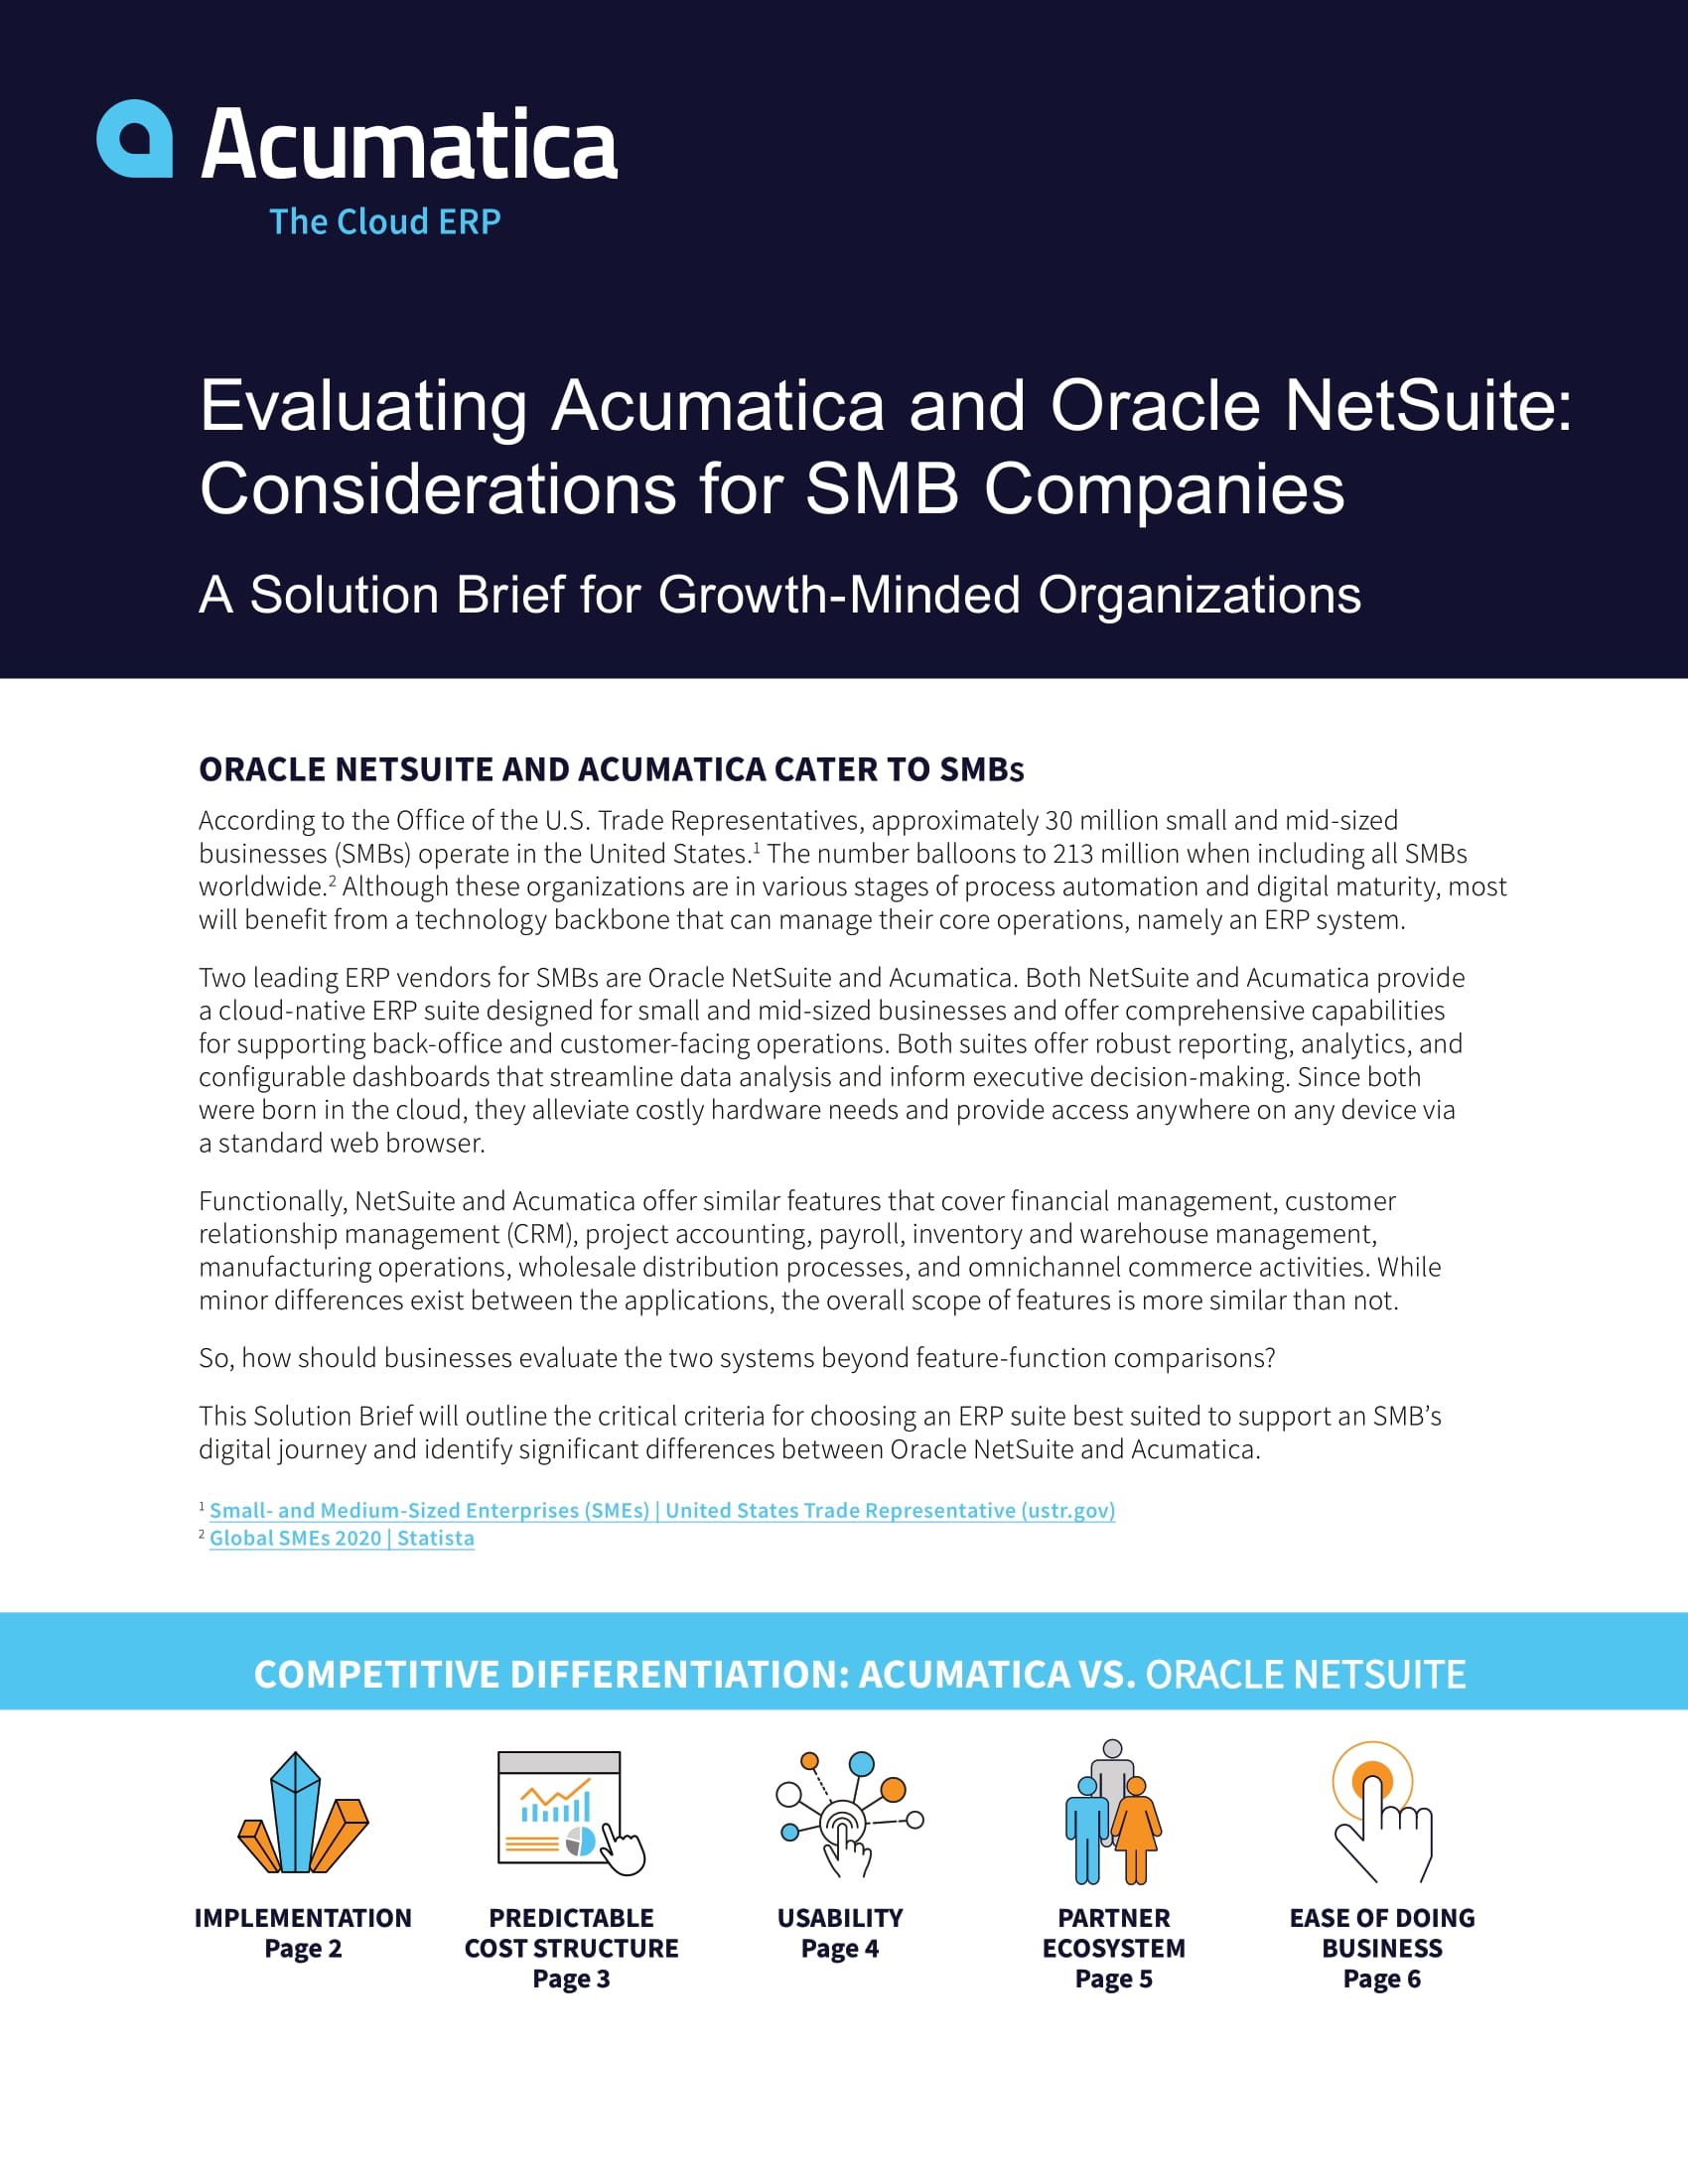 In a Battle Between Acumatica vs. NetSuite, Who’s the Best Choice?